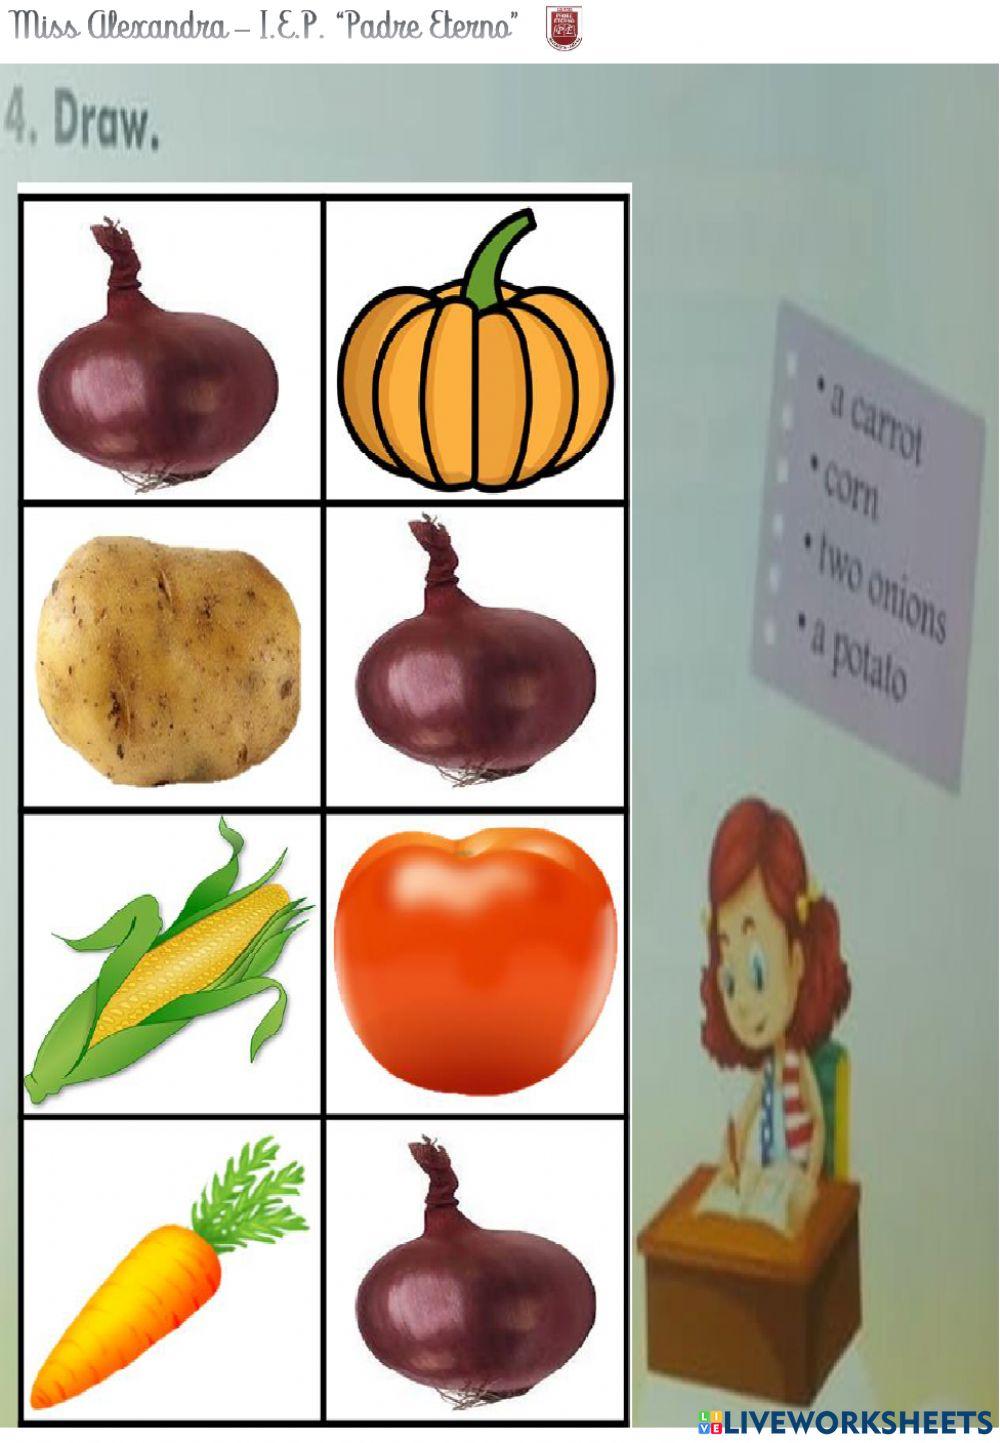 The Vegetables